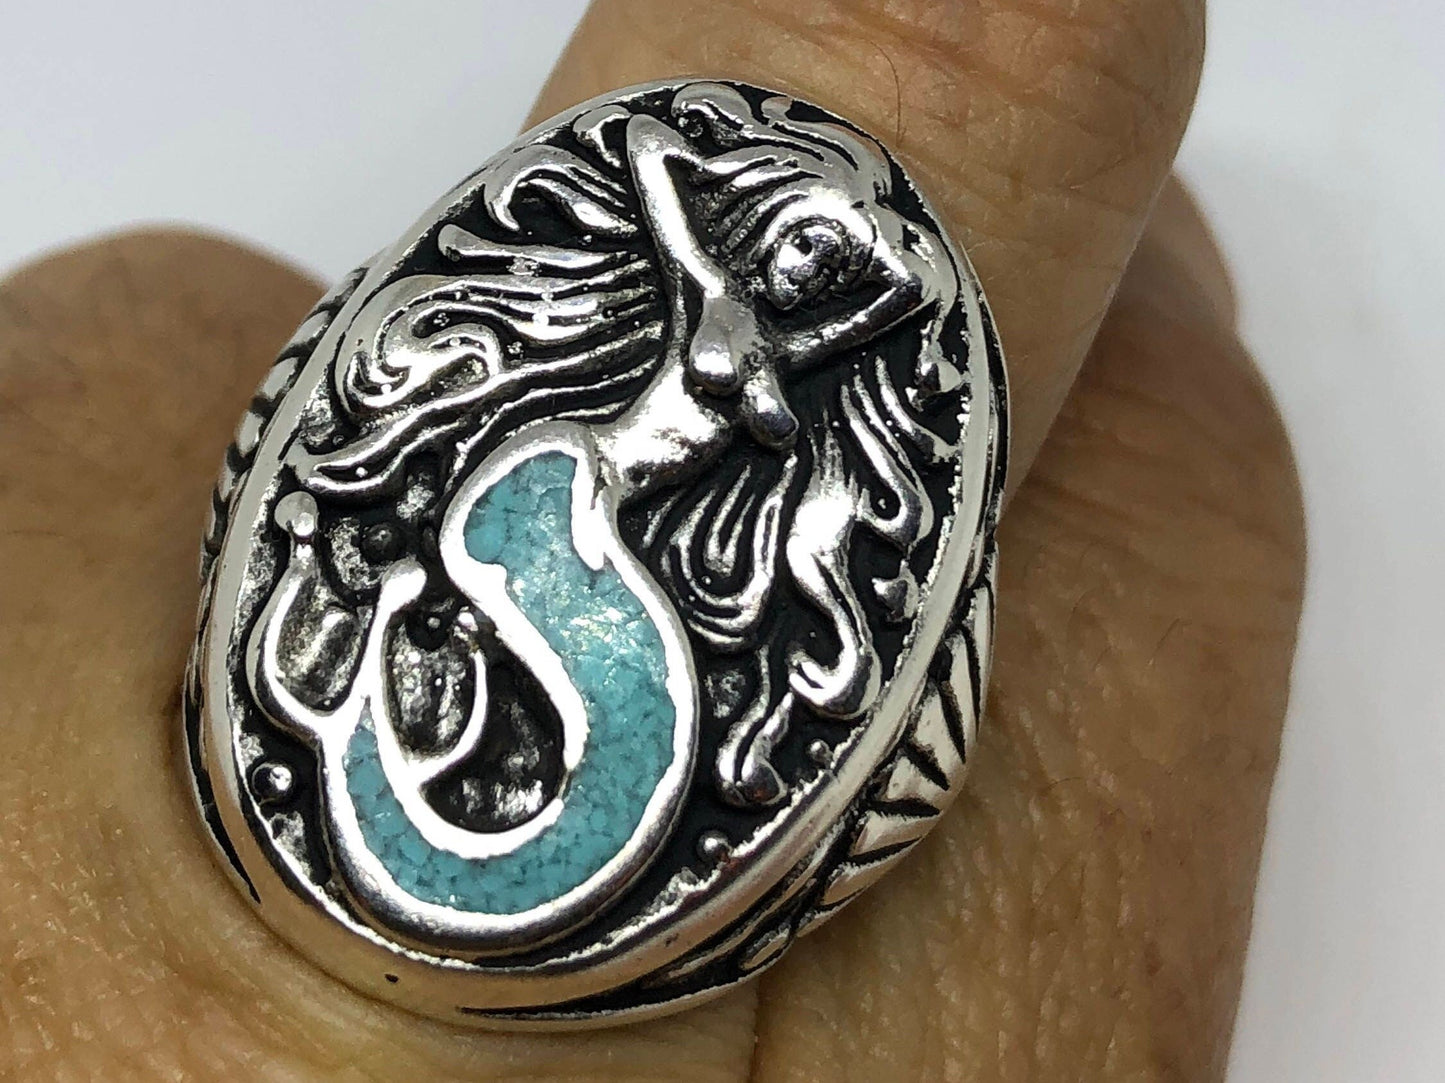 Mermaid ring with blue turquoise inlay in white bronze